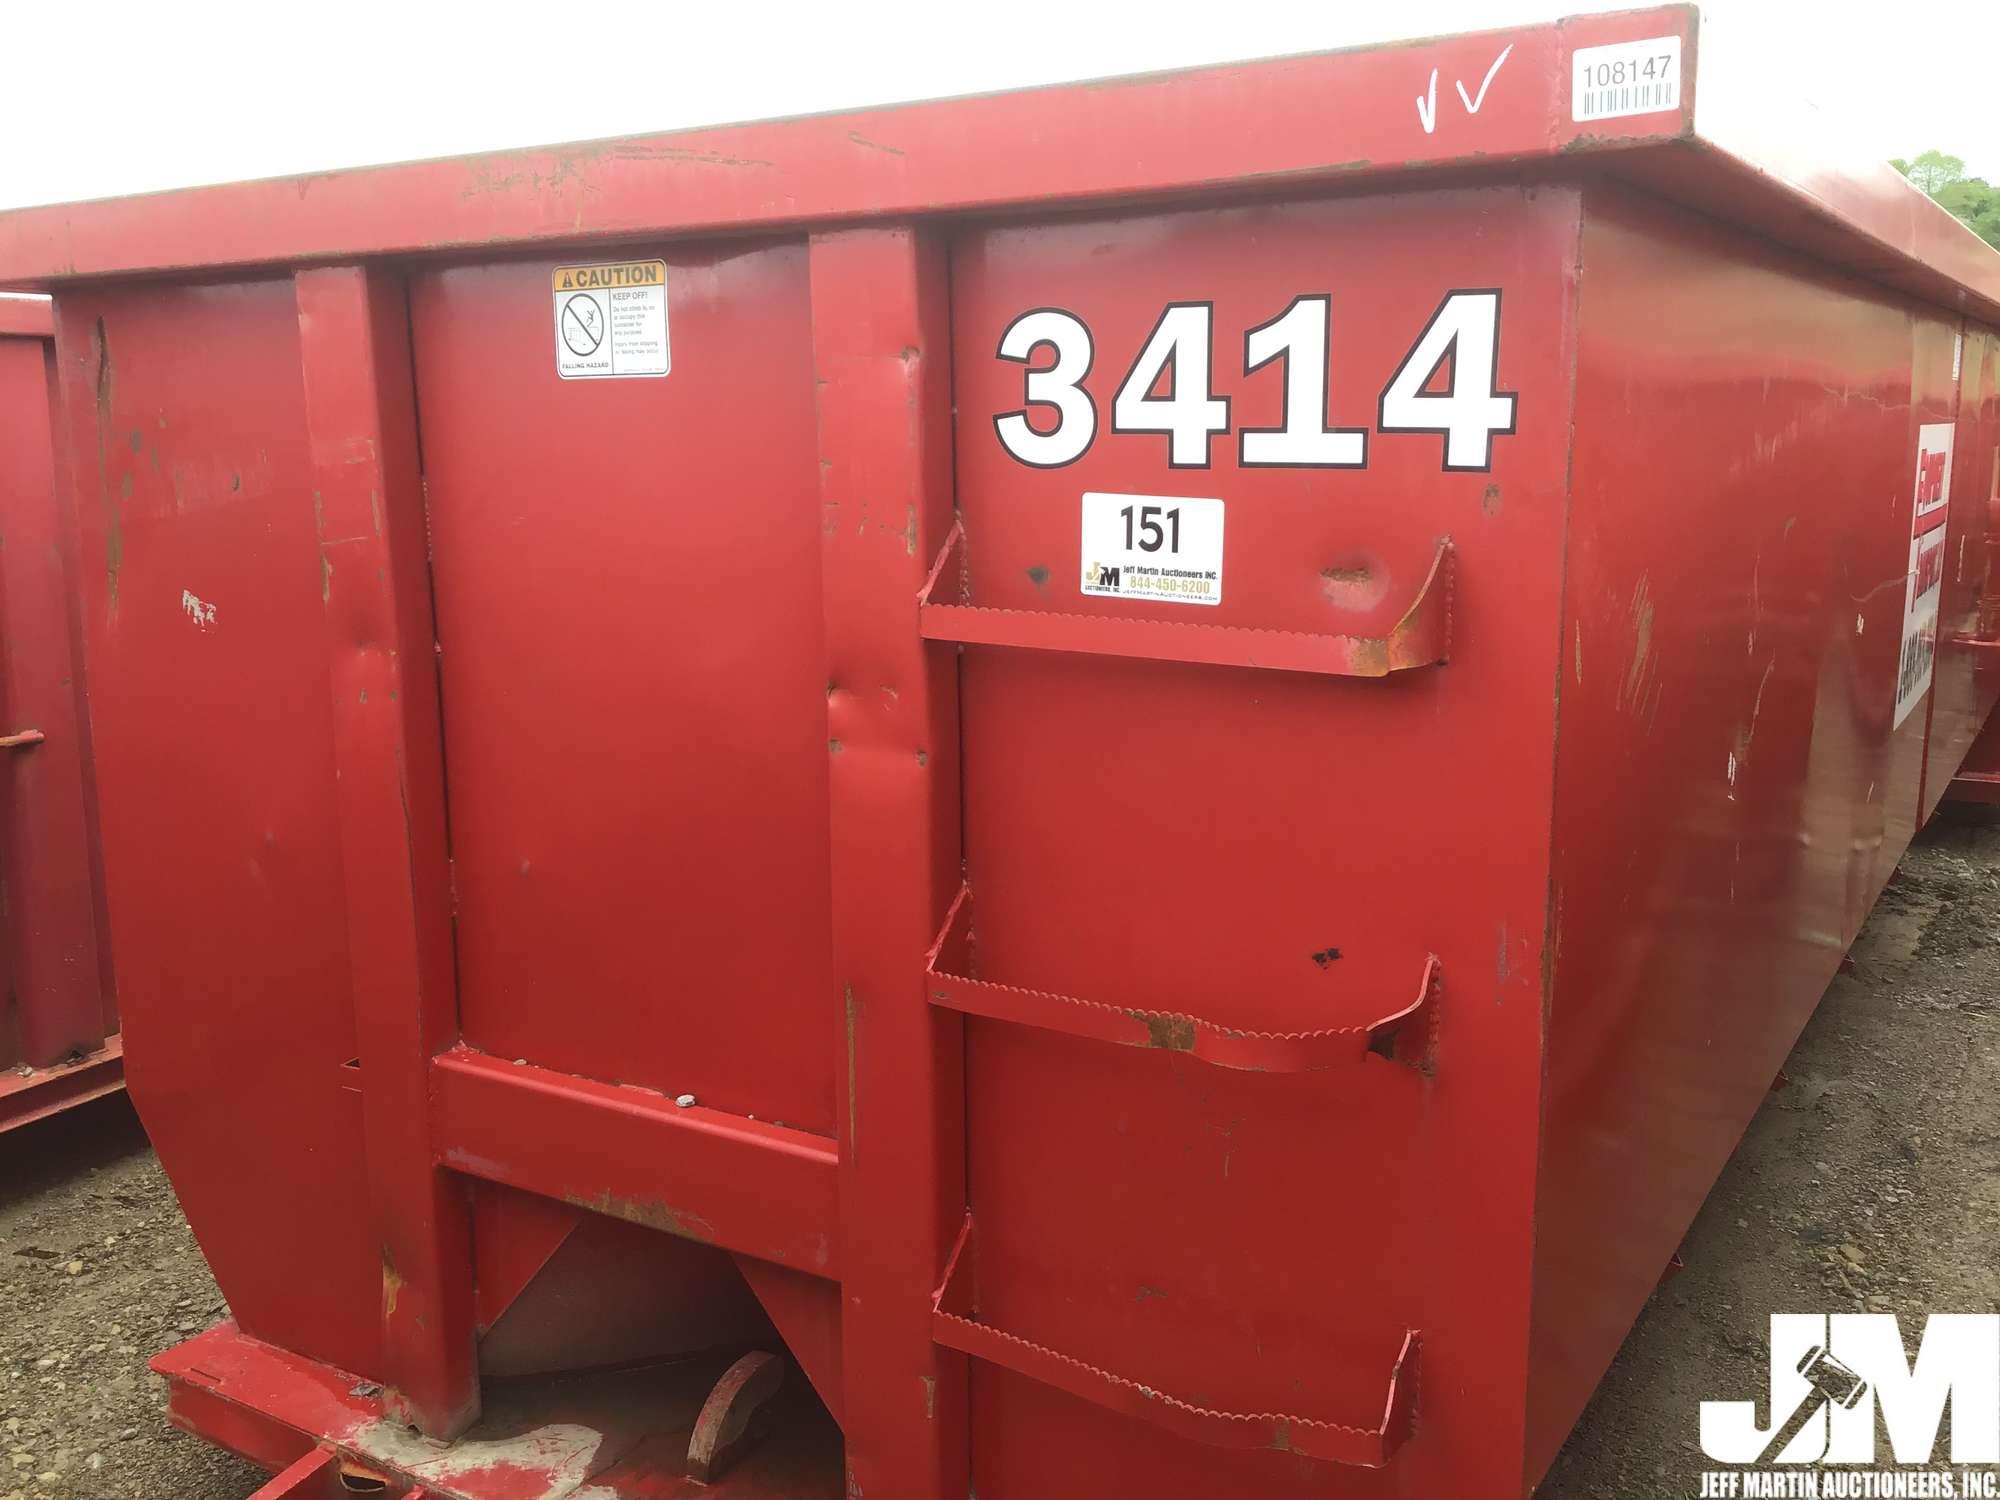 NORTHEAST 30 CY TUB STYLE ROLL-OFF CONTAINER SN: 58559